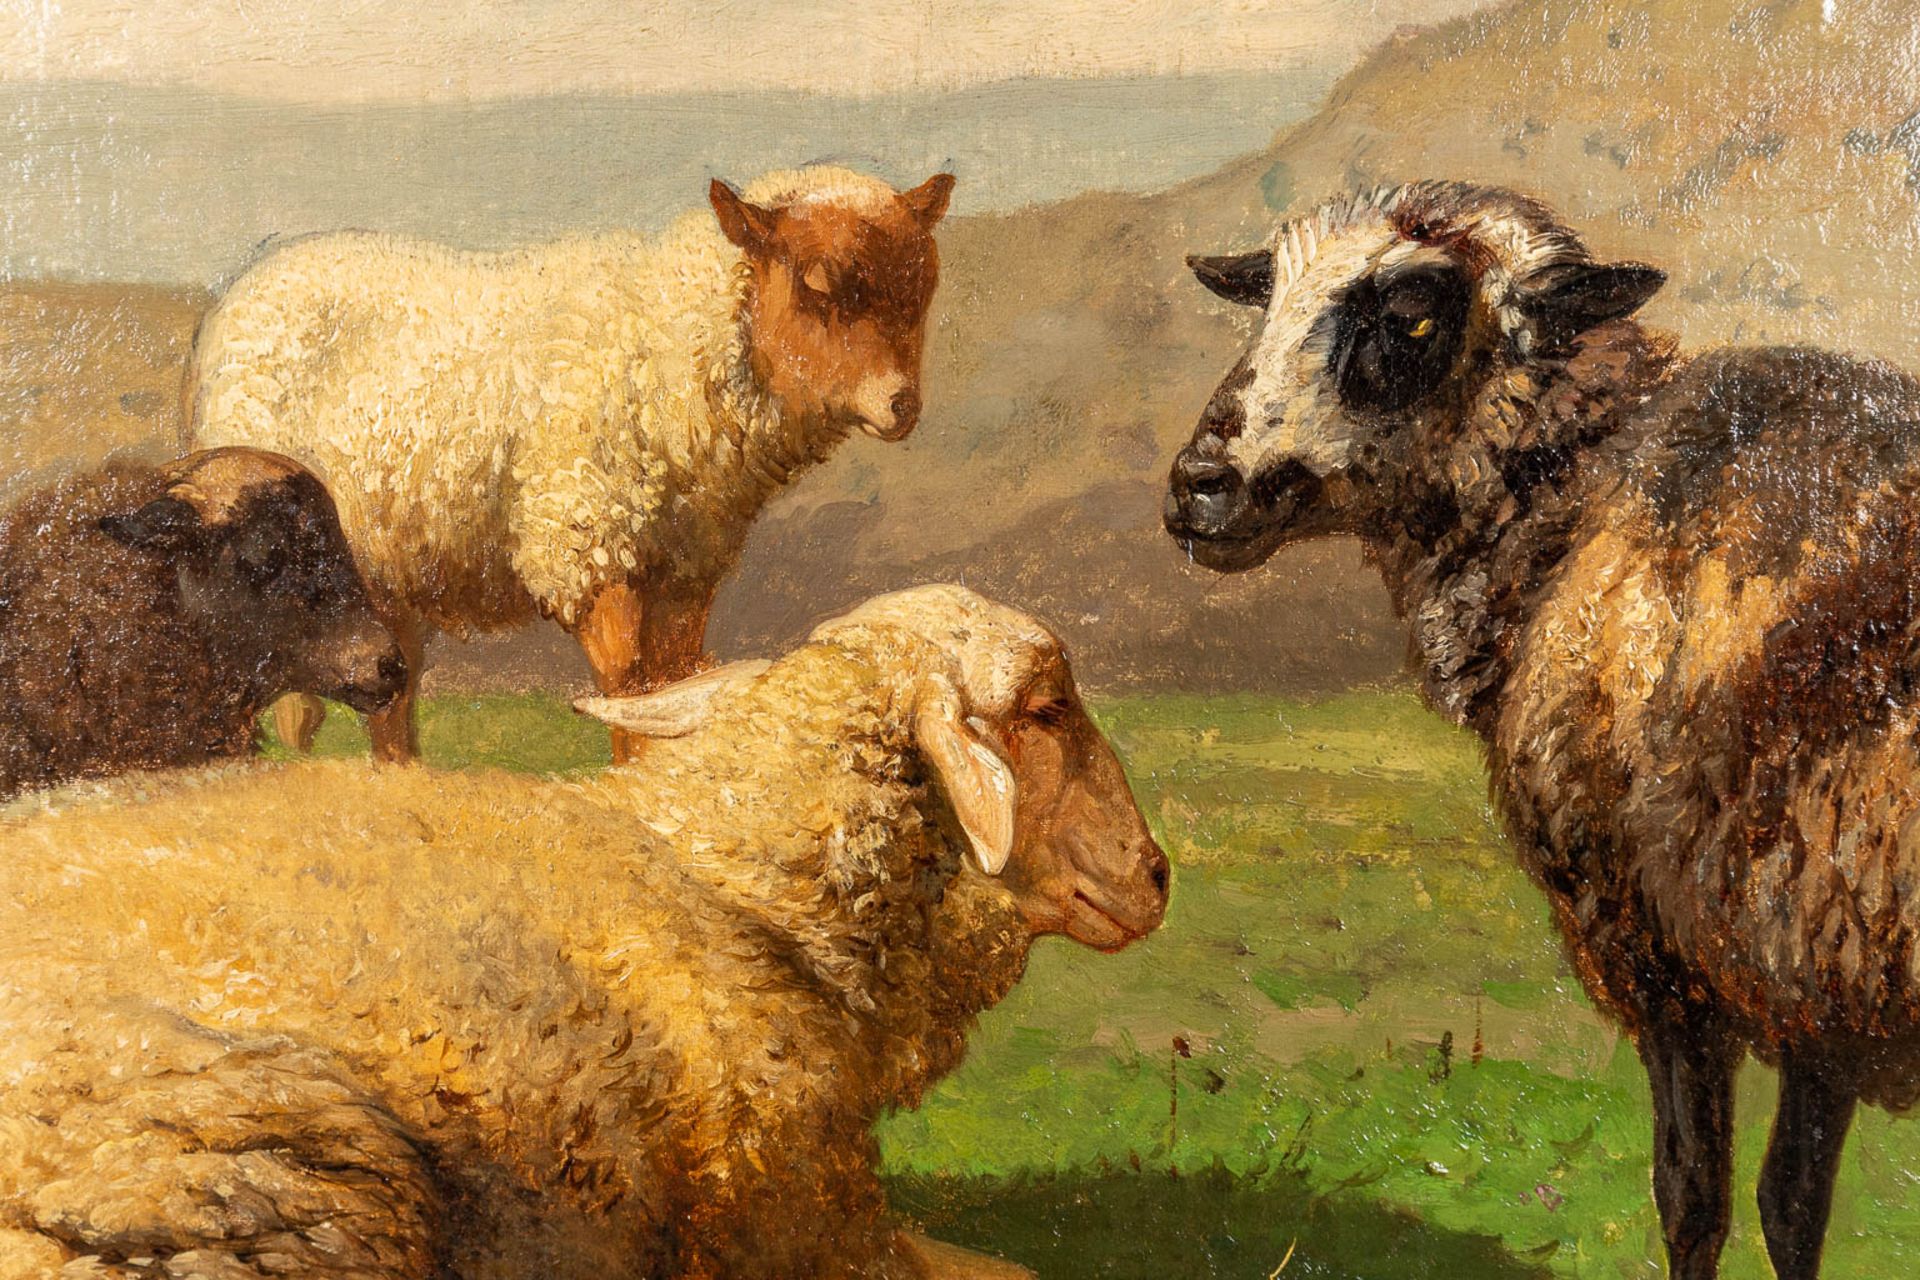 Louis ROBBE (1806-1887) 'The Black Sheep' a painting, oil on canvas. (W: 70 x H: 46 cm) - Image 6 of 7